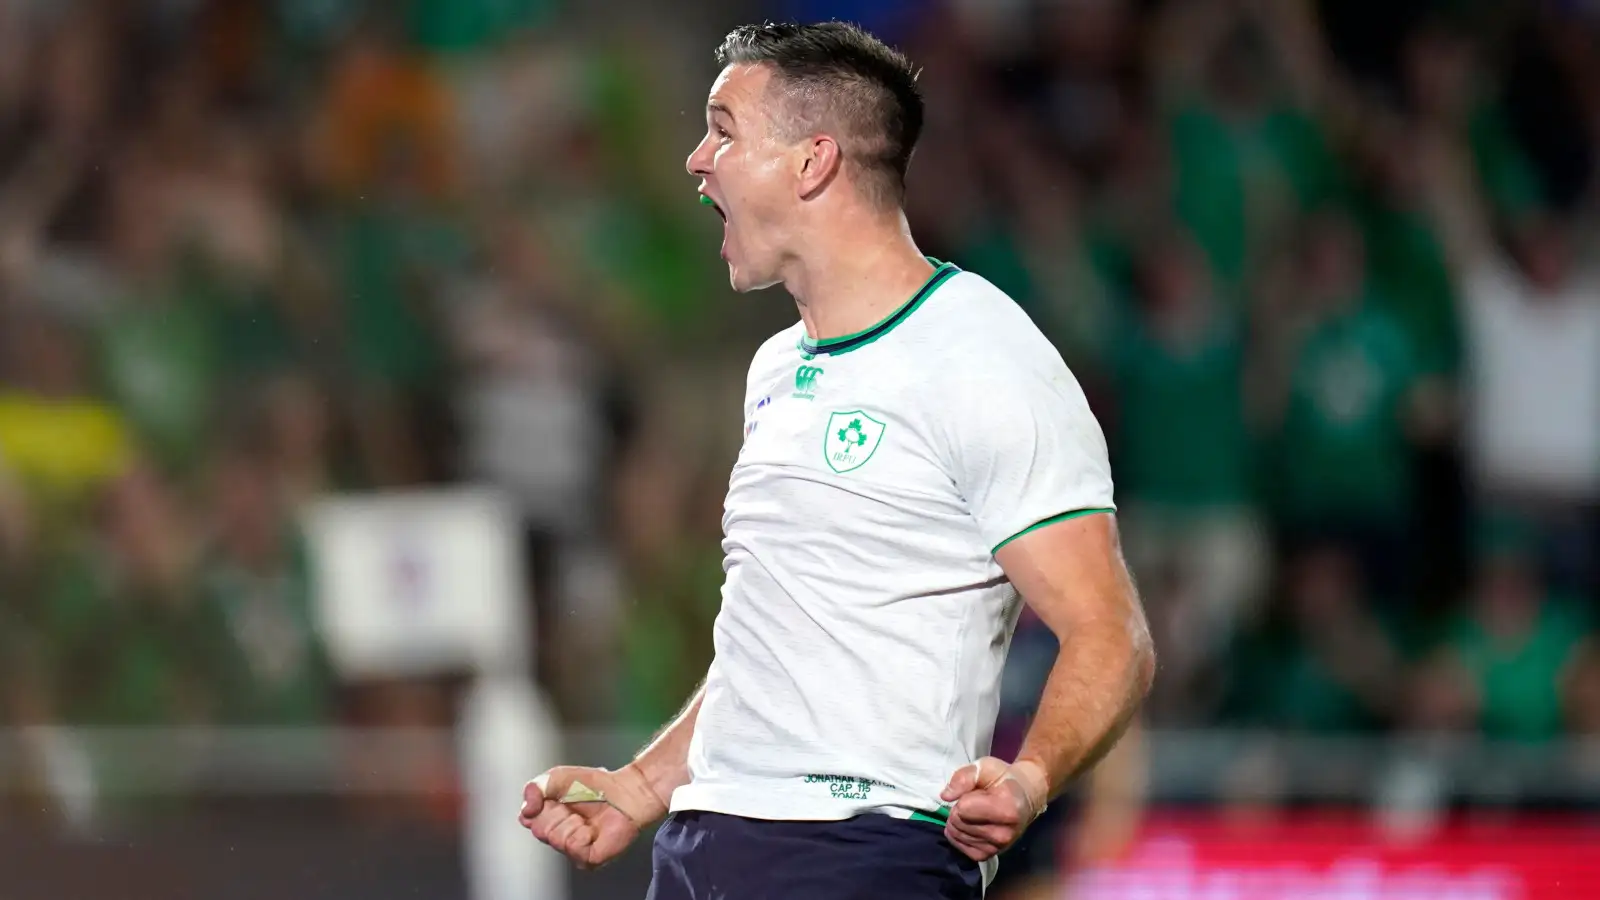 Johnny Sexton celebrates breaking Ireland's points record against Tonga in Rugby World Cup.